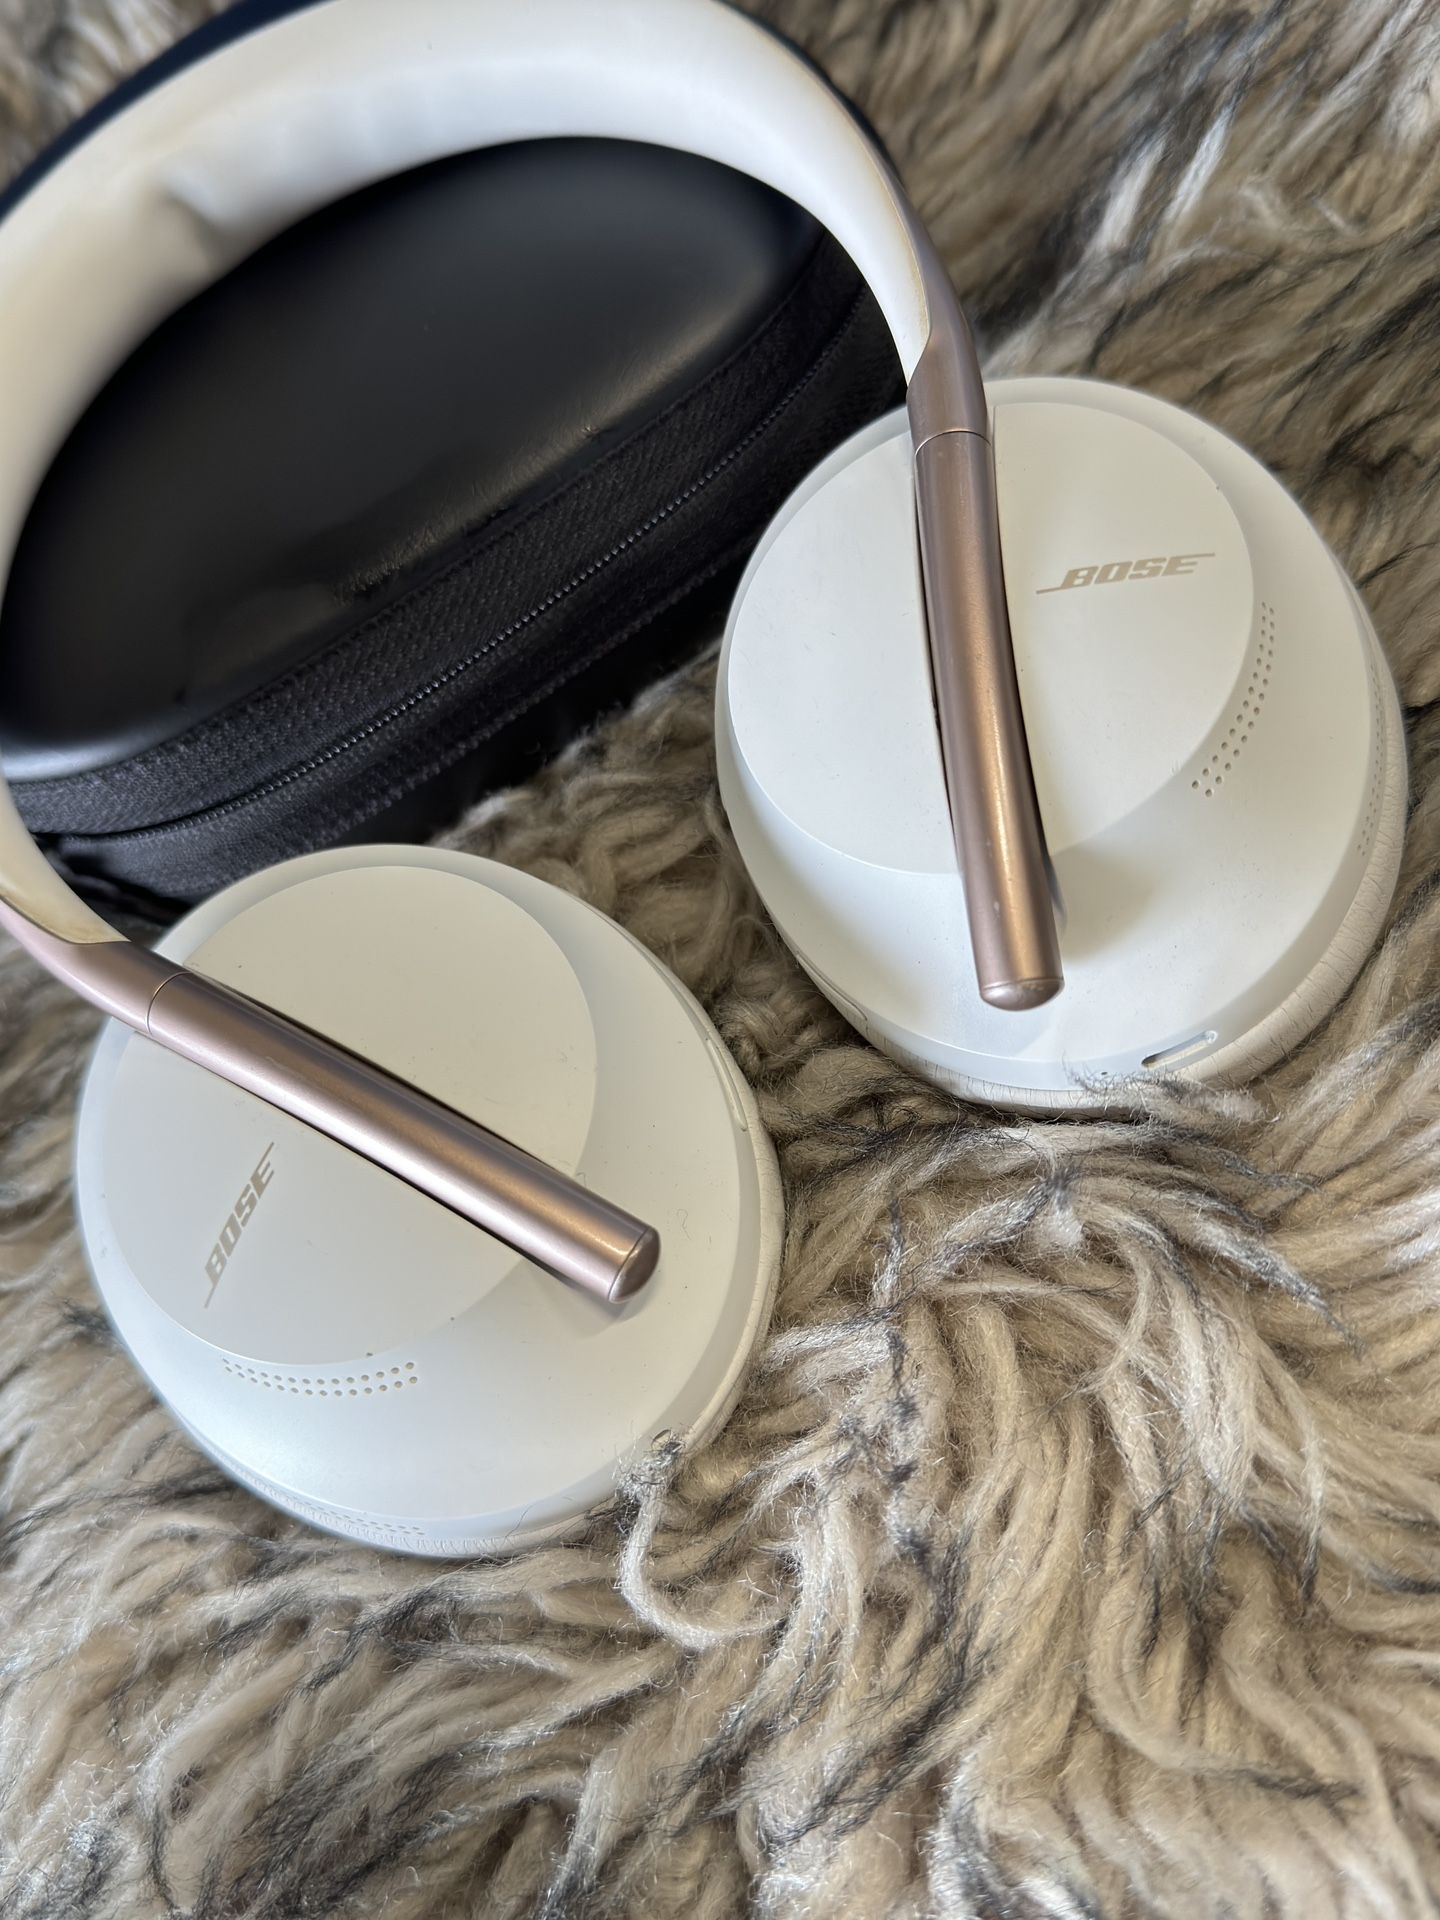 Bose Headphones 700, Noise Cancelling Bluetooth Over-Ear Wireless Headphones w/Built-In Microphone